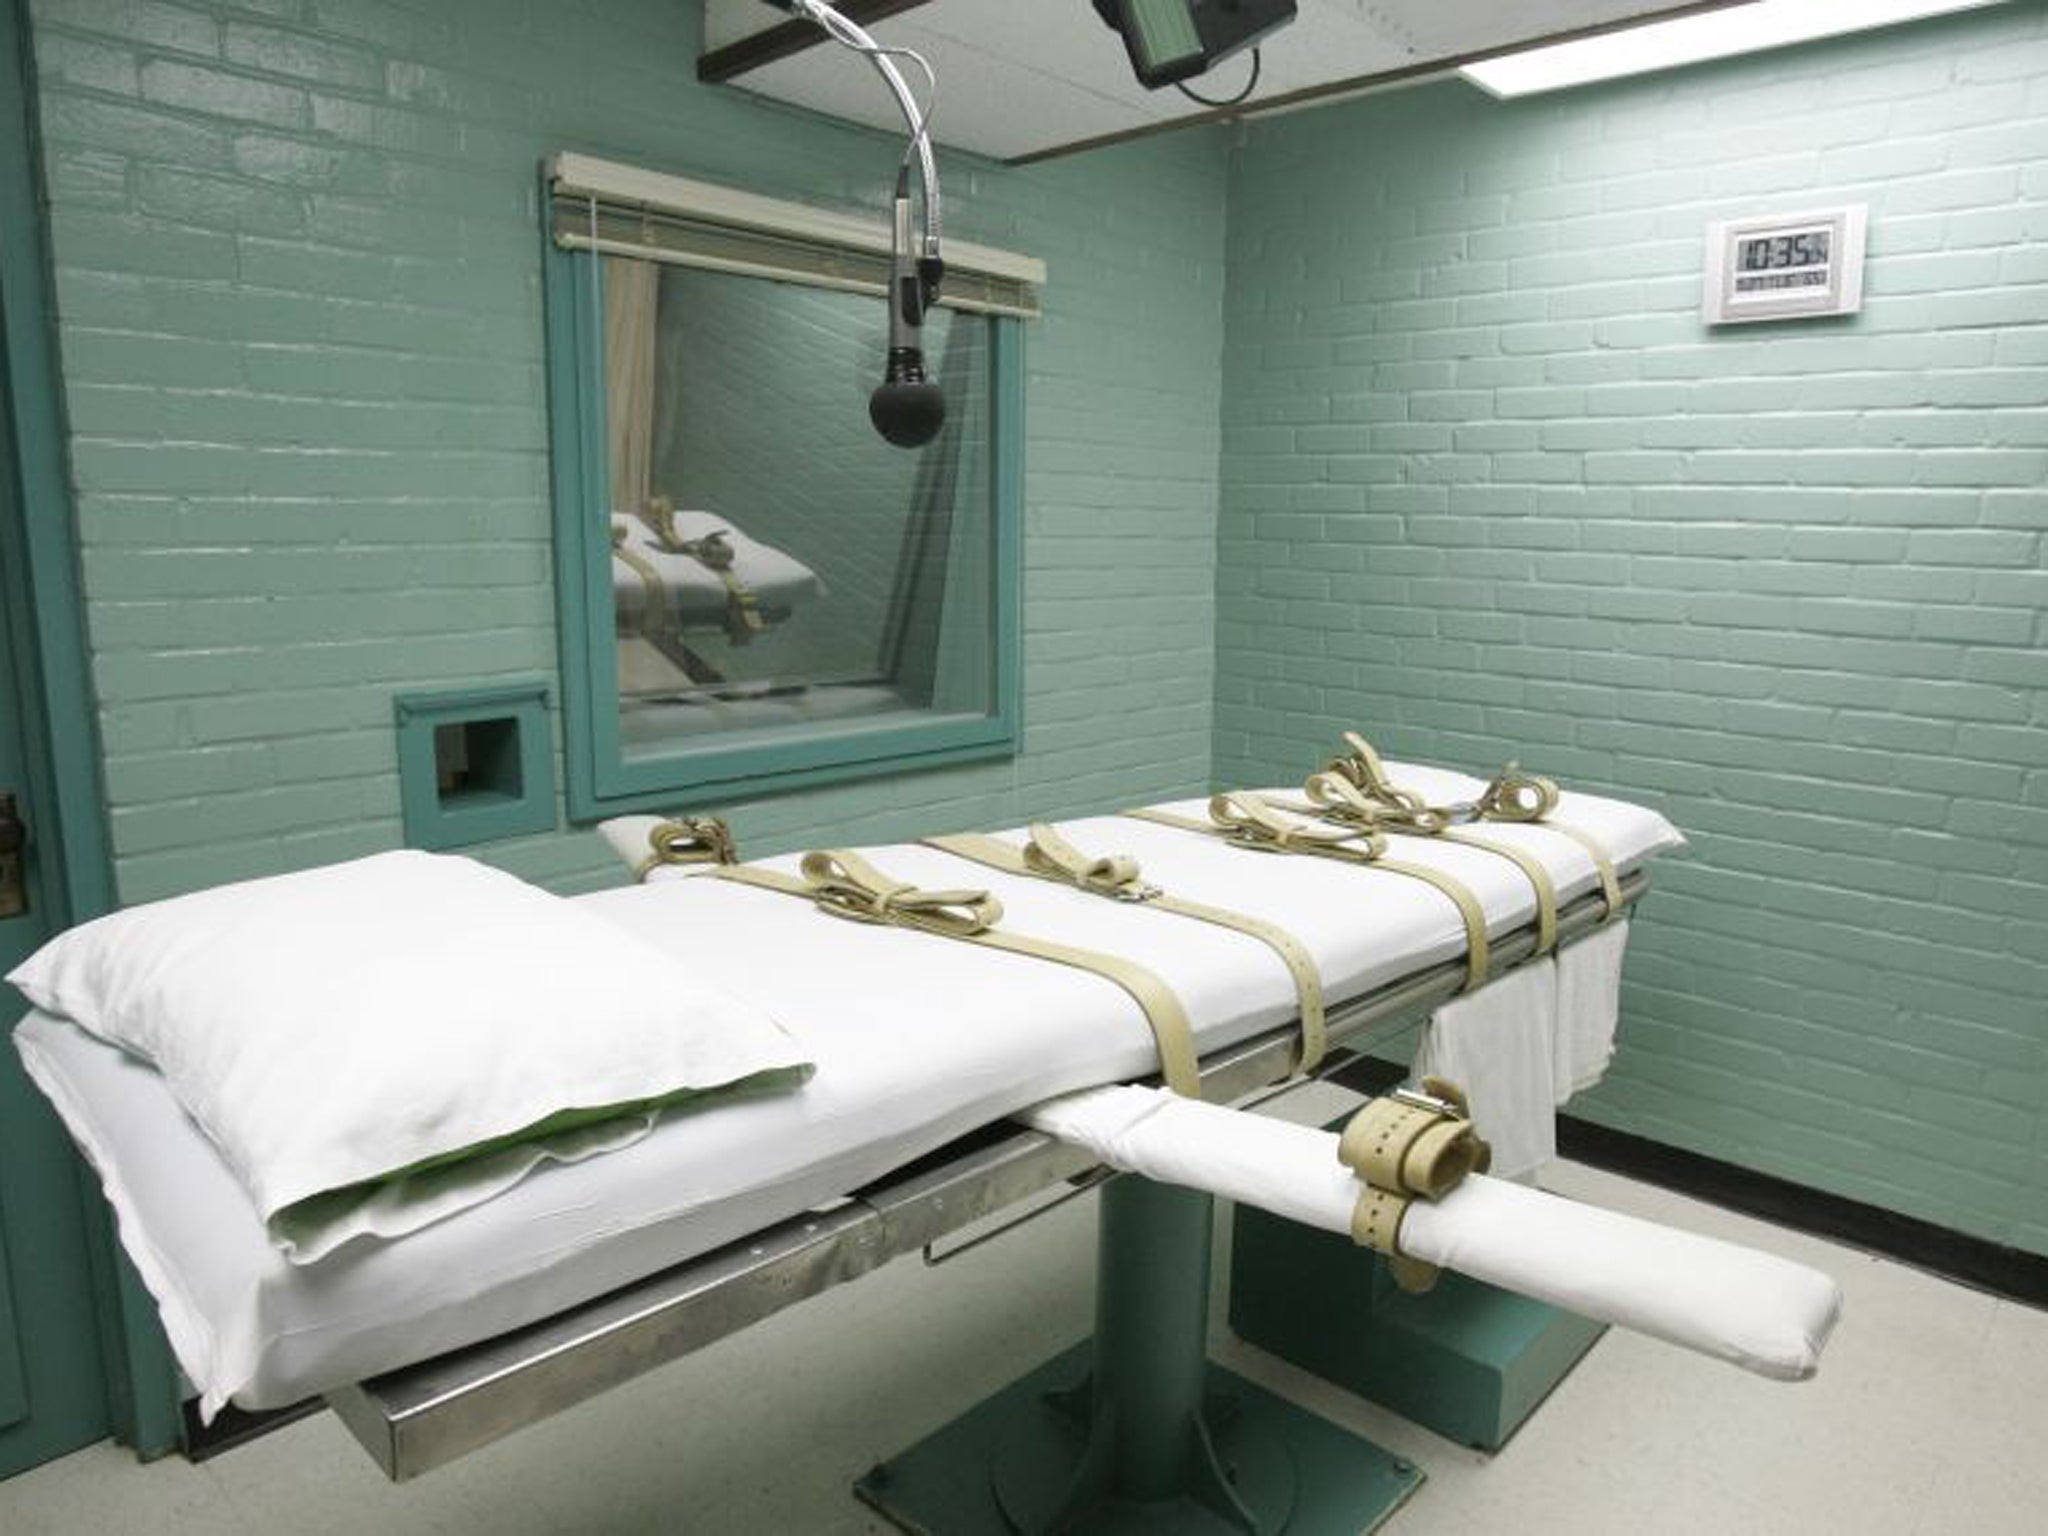 A lethal injection chamber in Oklahoma